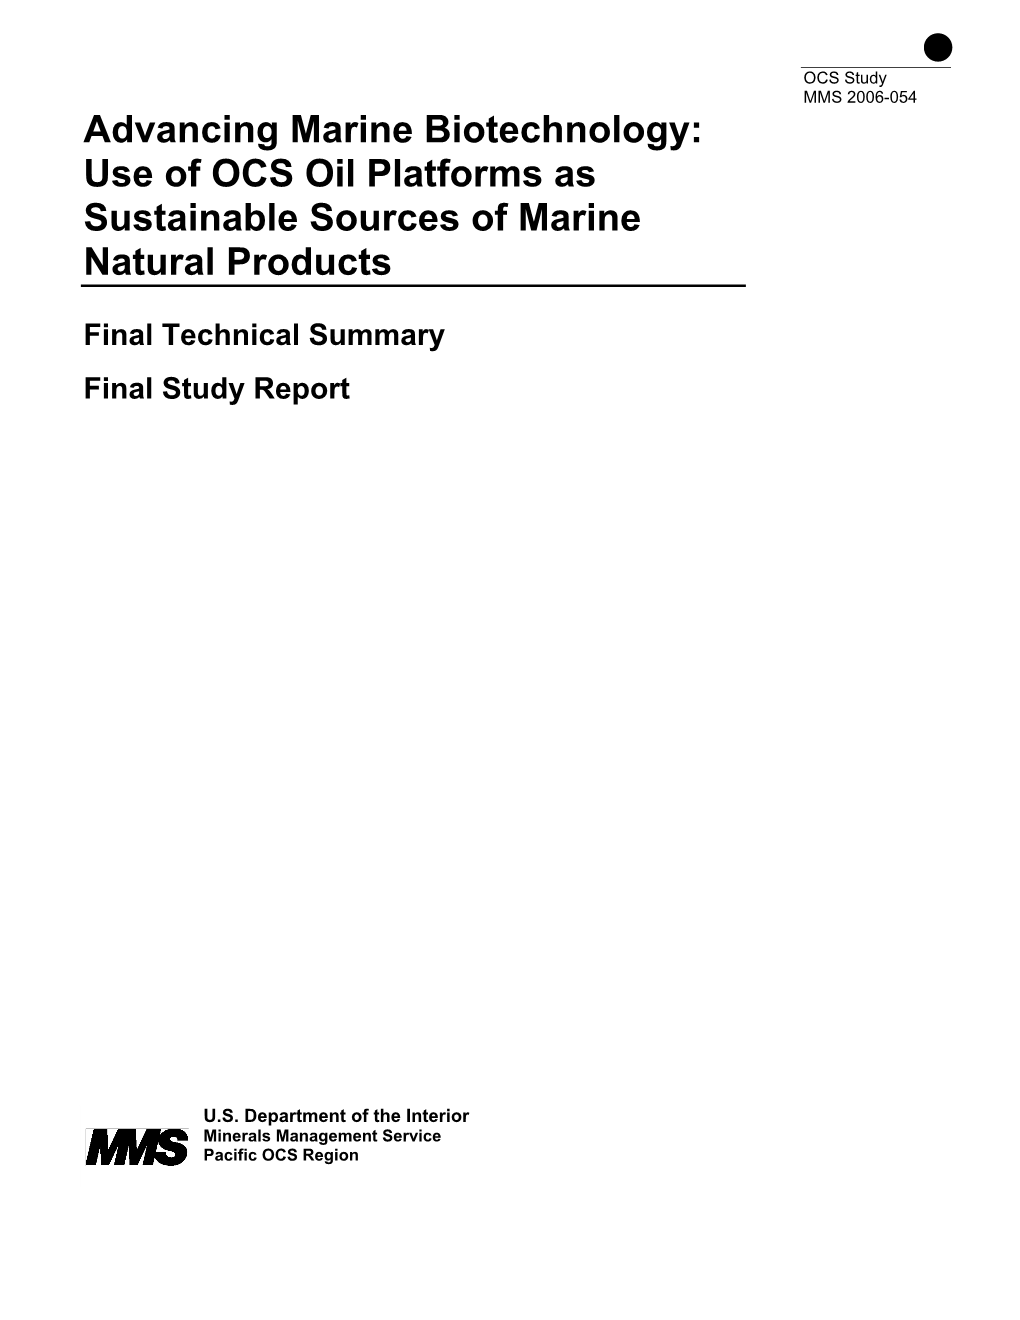 Advancing Marine Biotechnology: Use of OCS Oil Platforms As Sustainable Sources of Marine Natural Products